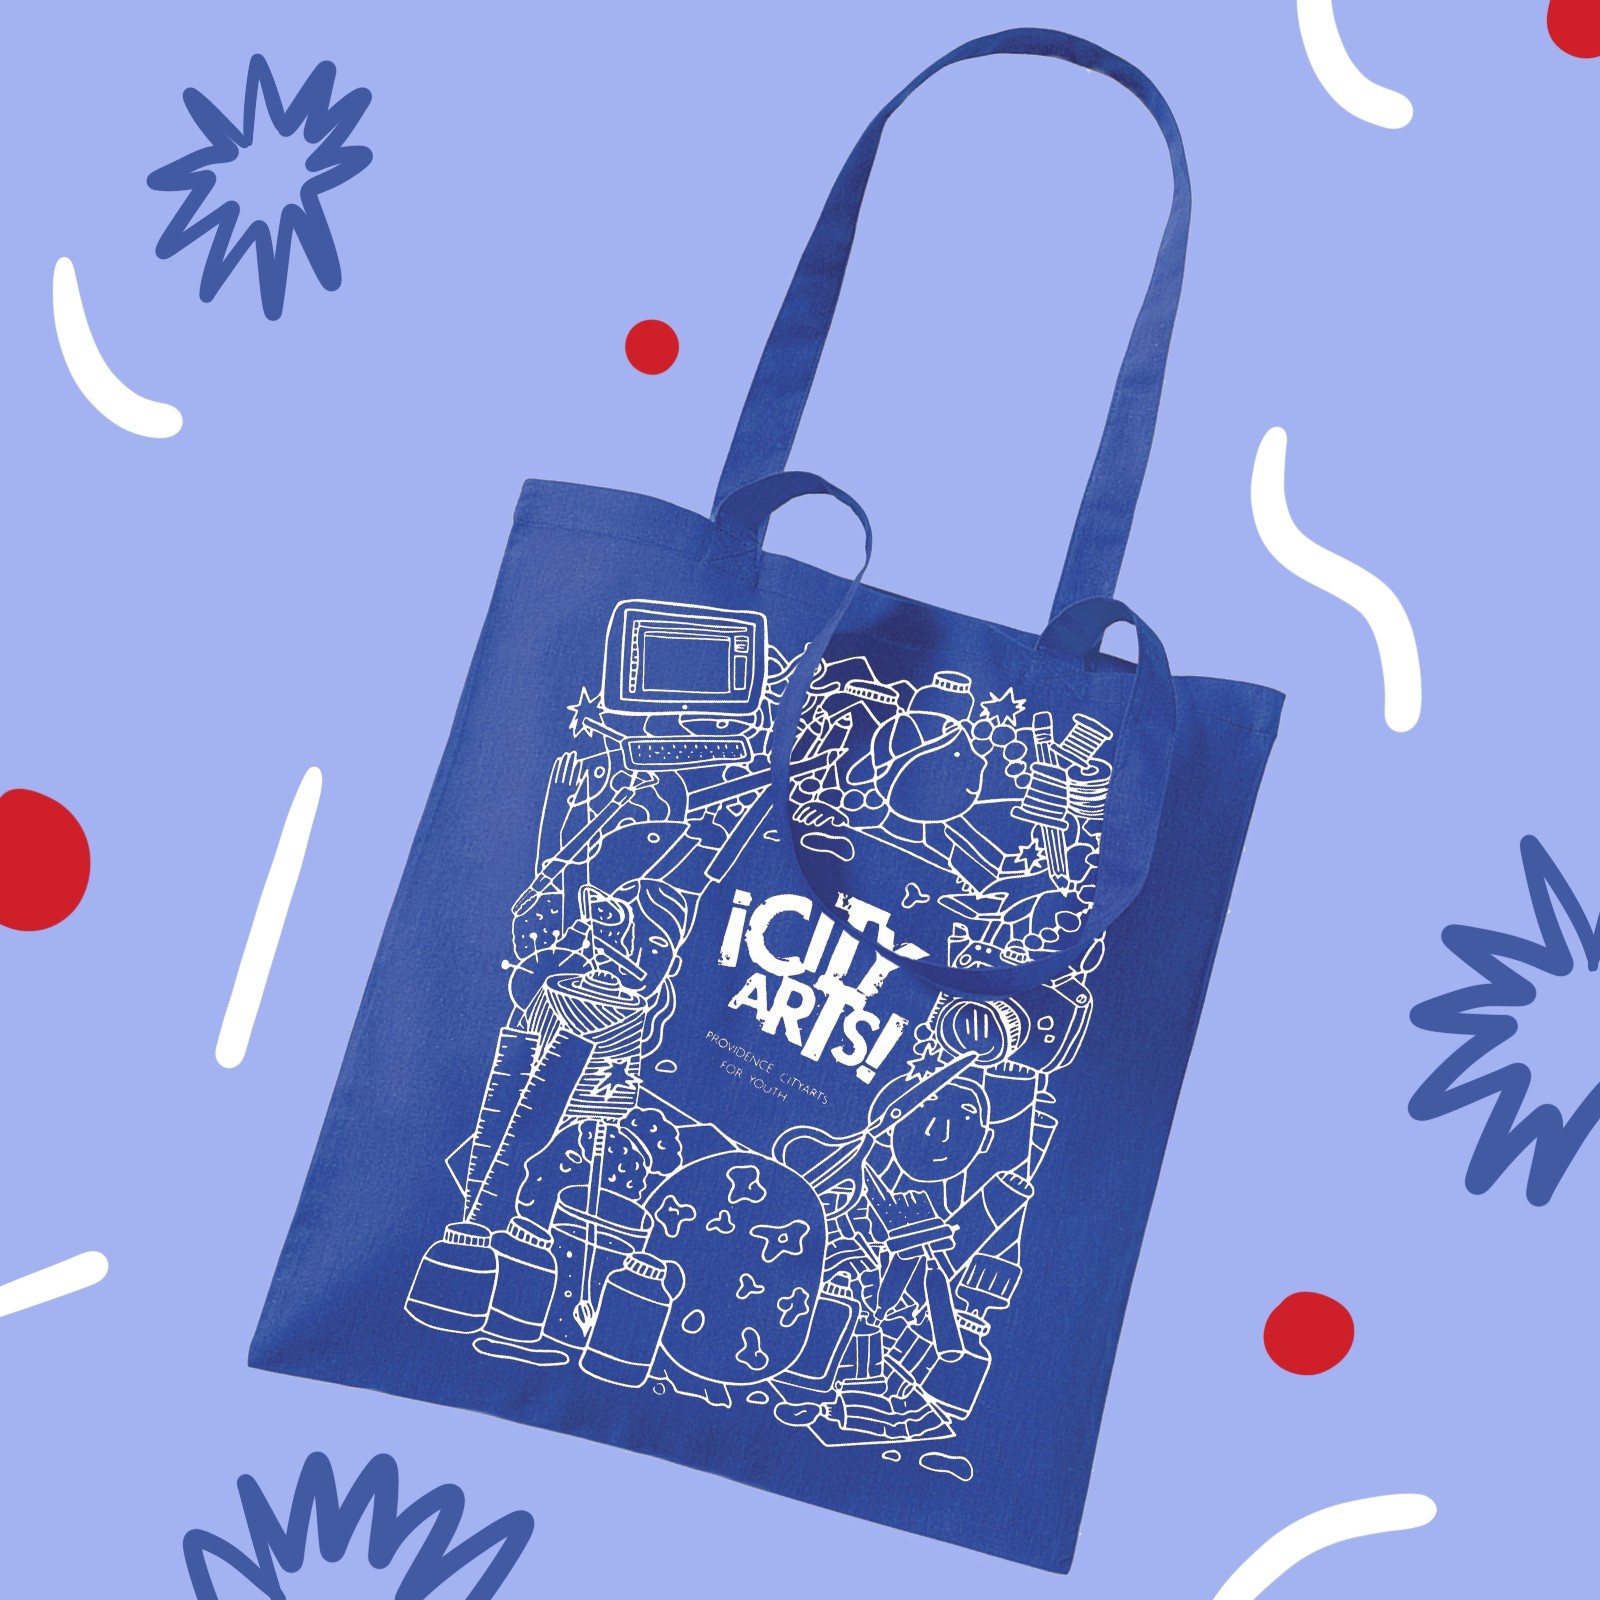 Blue ¡CityArts! Tote Bag with white image printed on top. Image includes children and art materials with central text that reads, "CityArts for Youth"